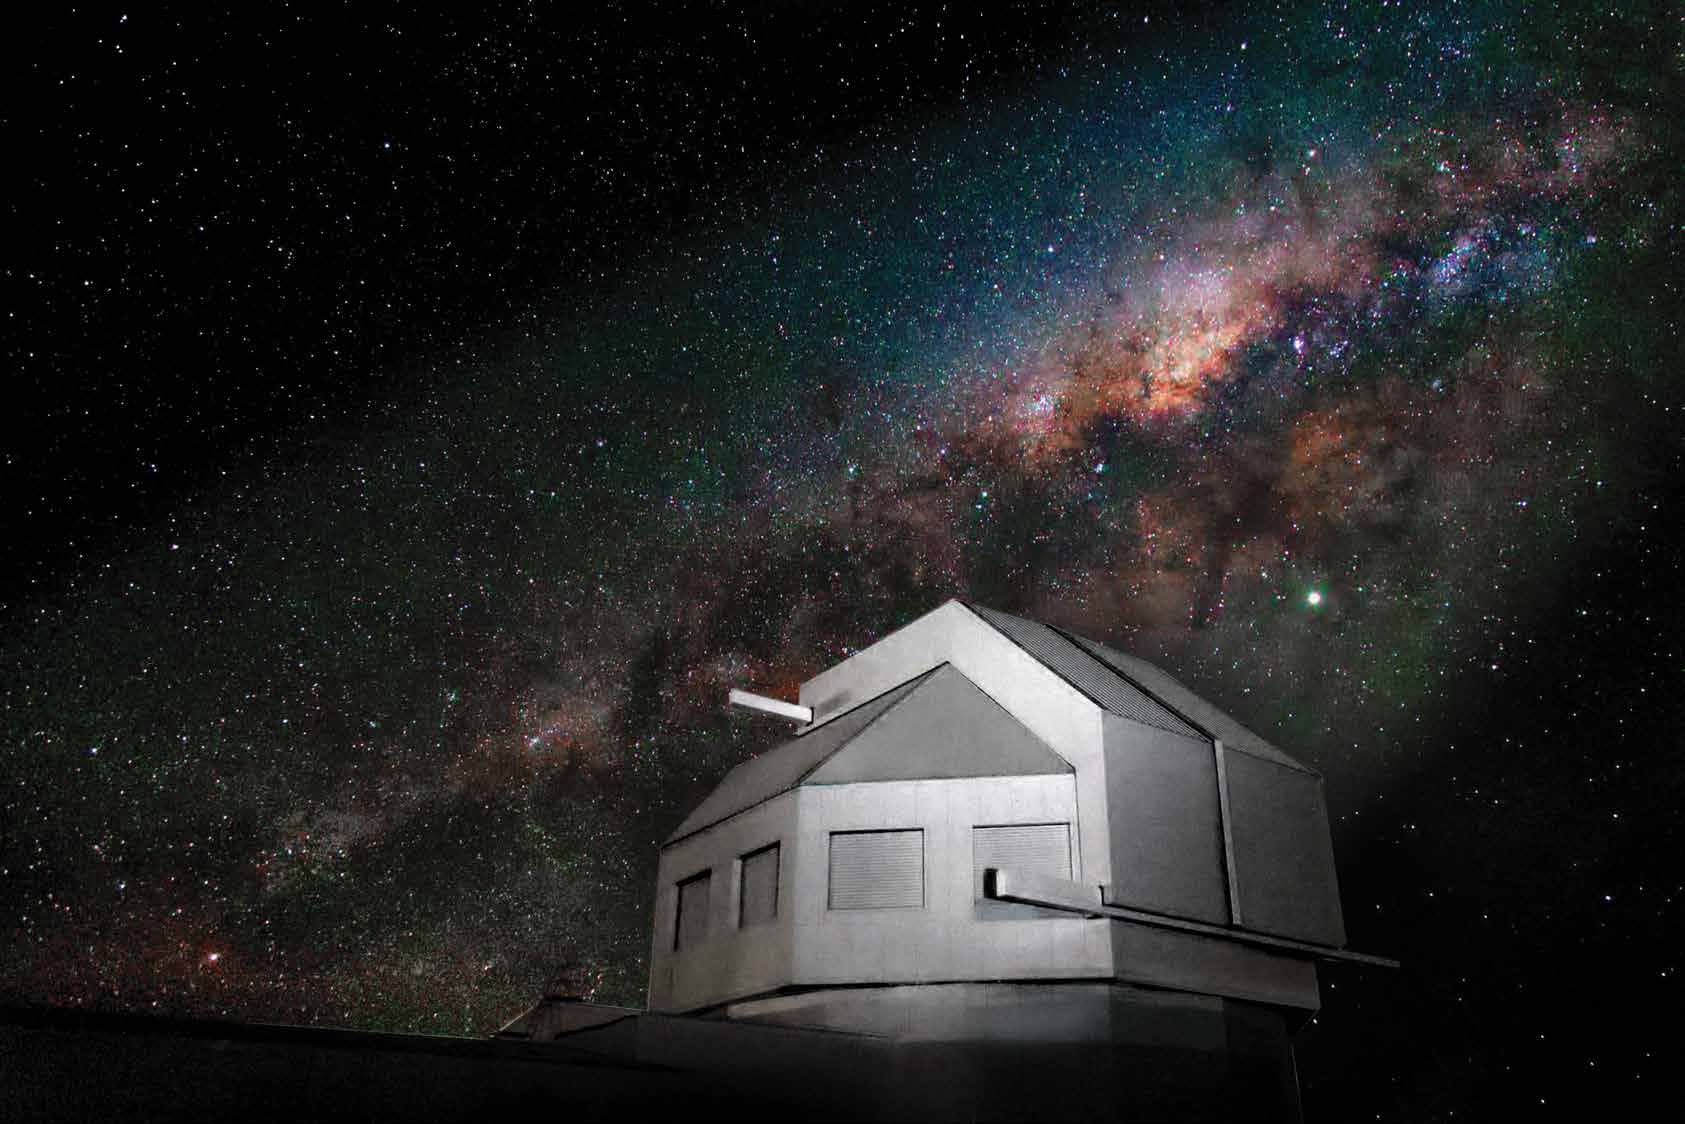 The photo is of the enclosure for the Space Surveillance Telescope. The enclosure was provided by the Australian government.